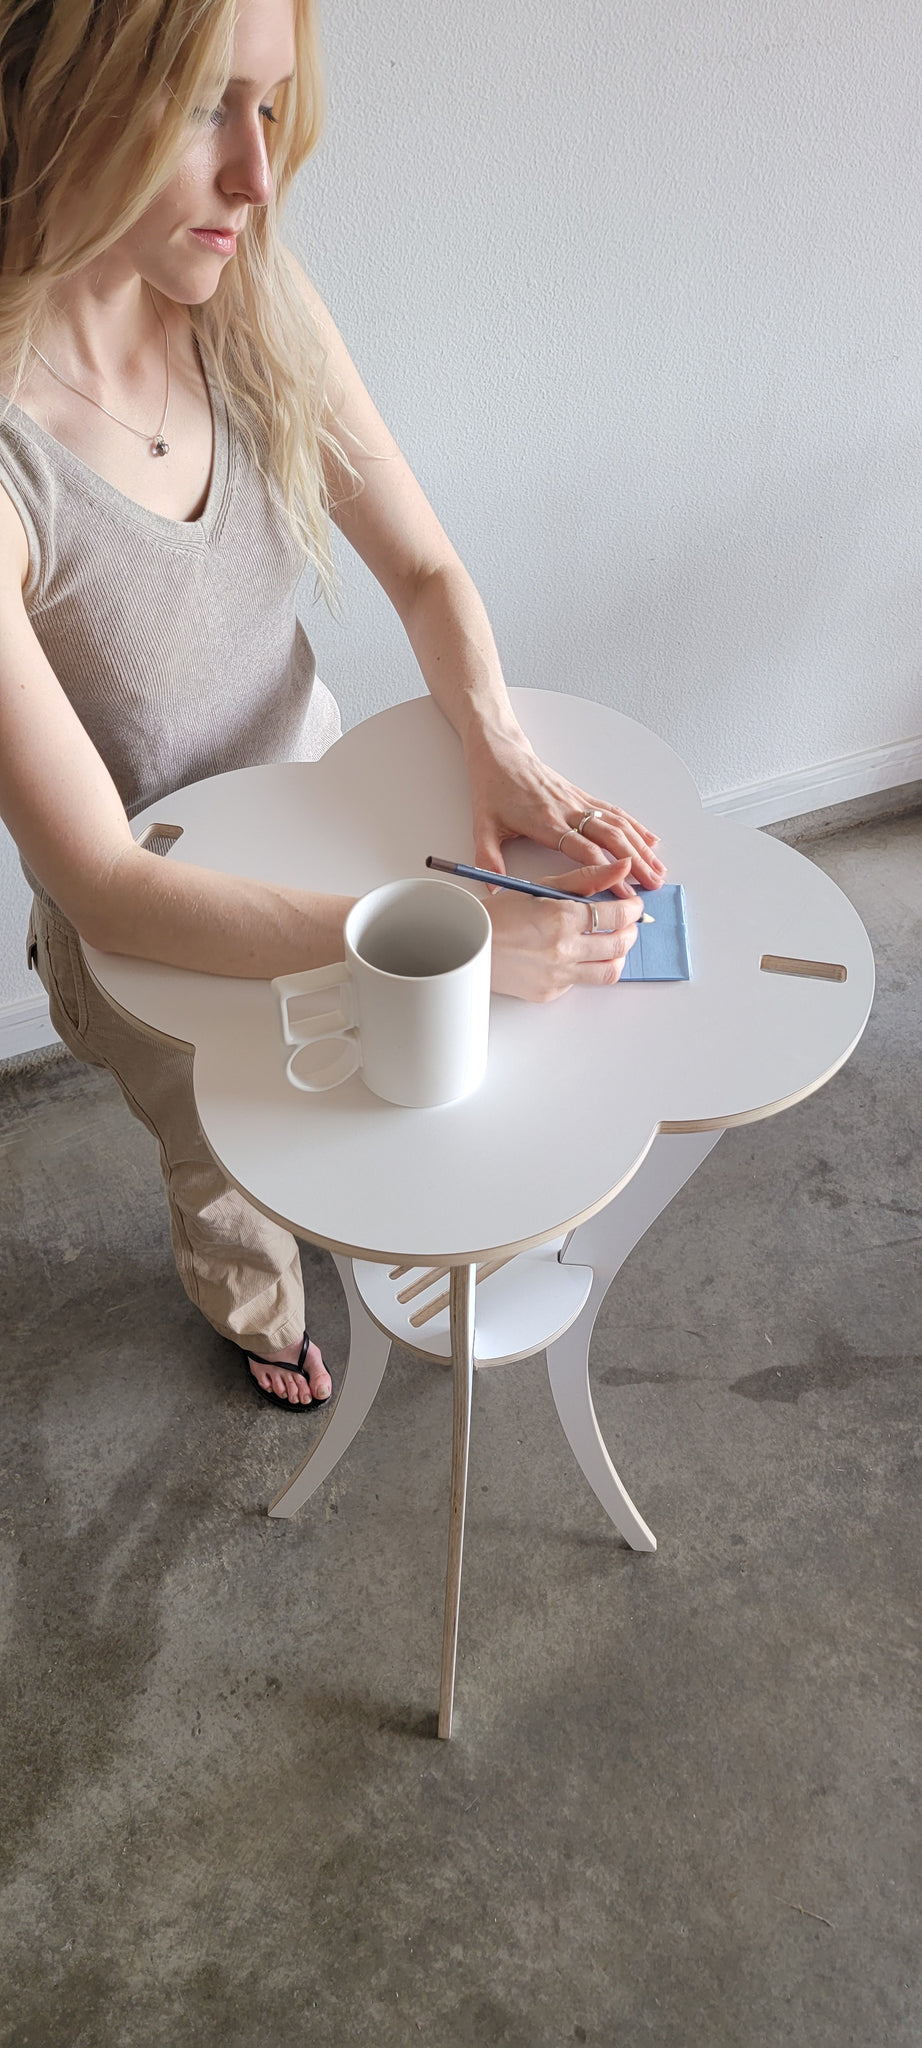 Lilly Updesk w/Cloud